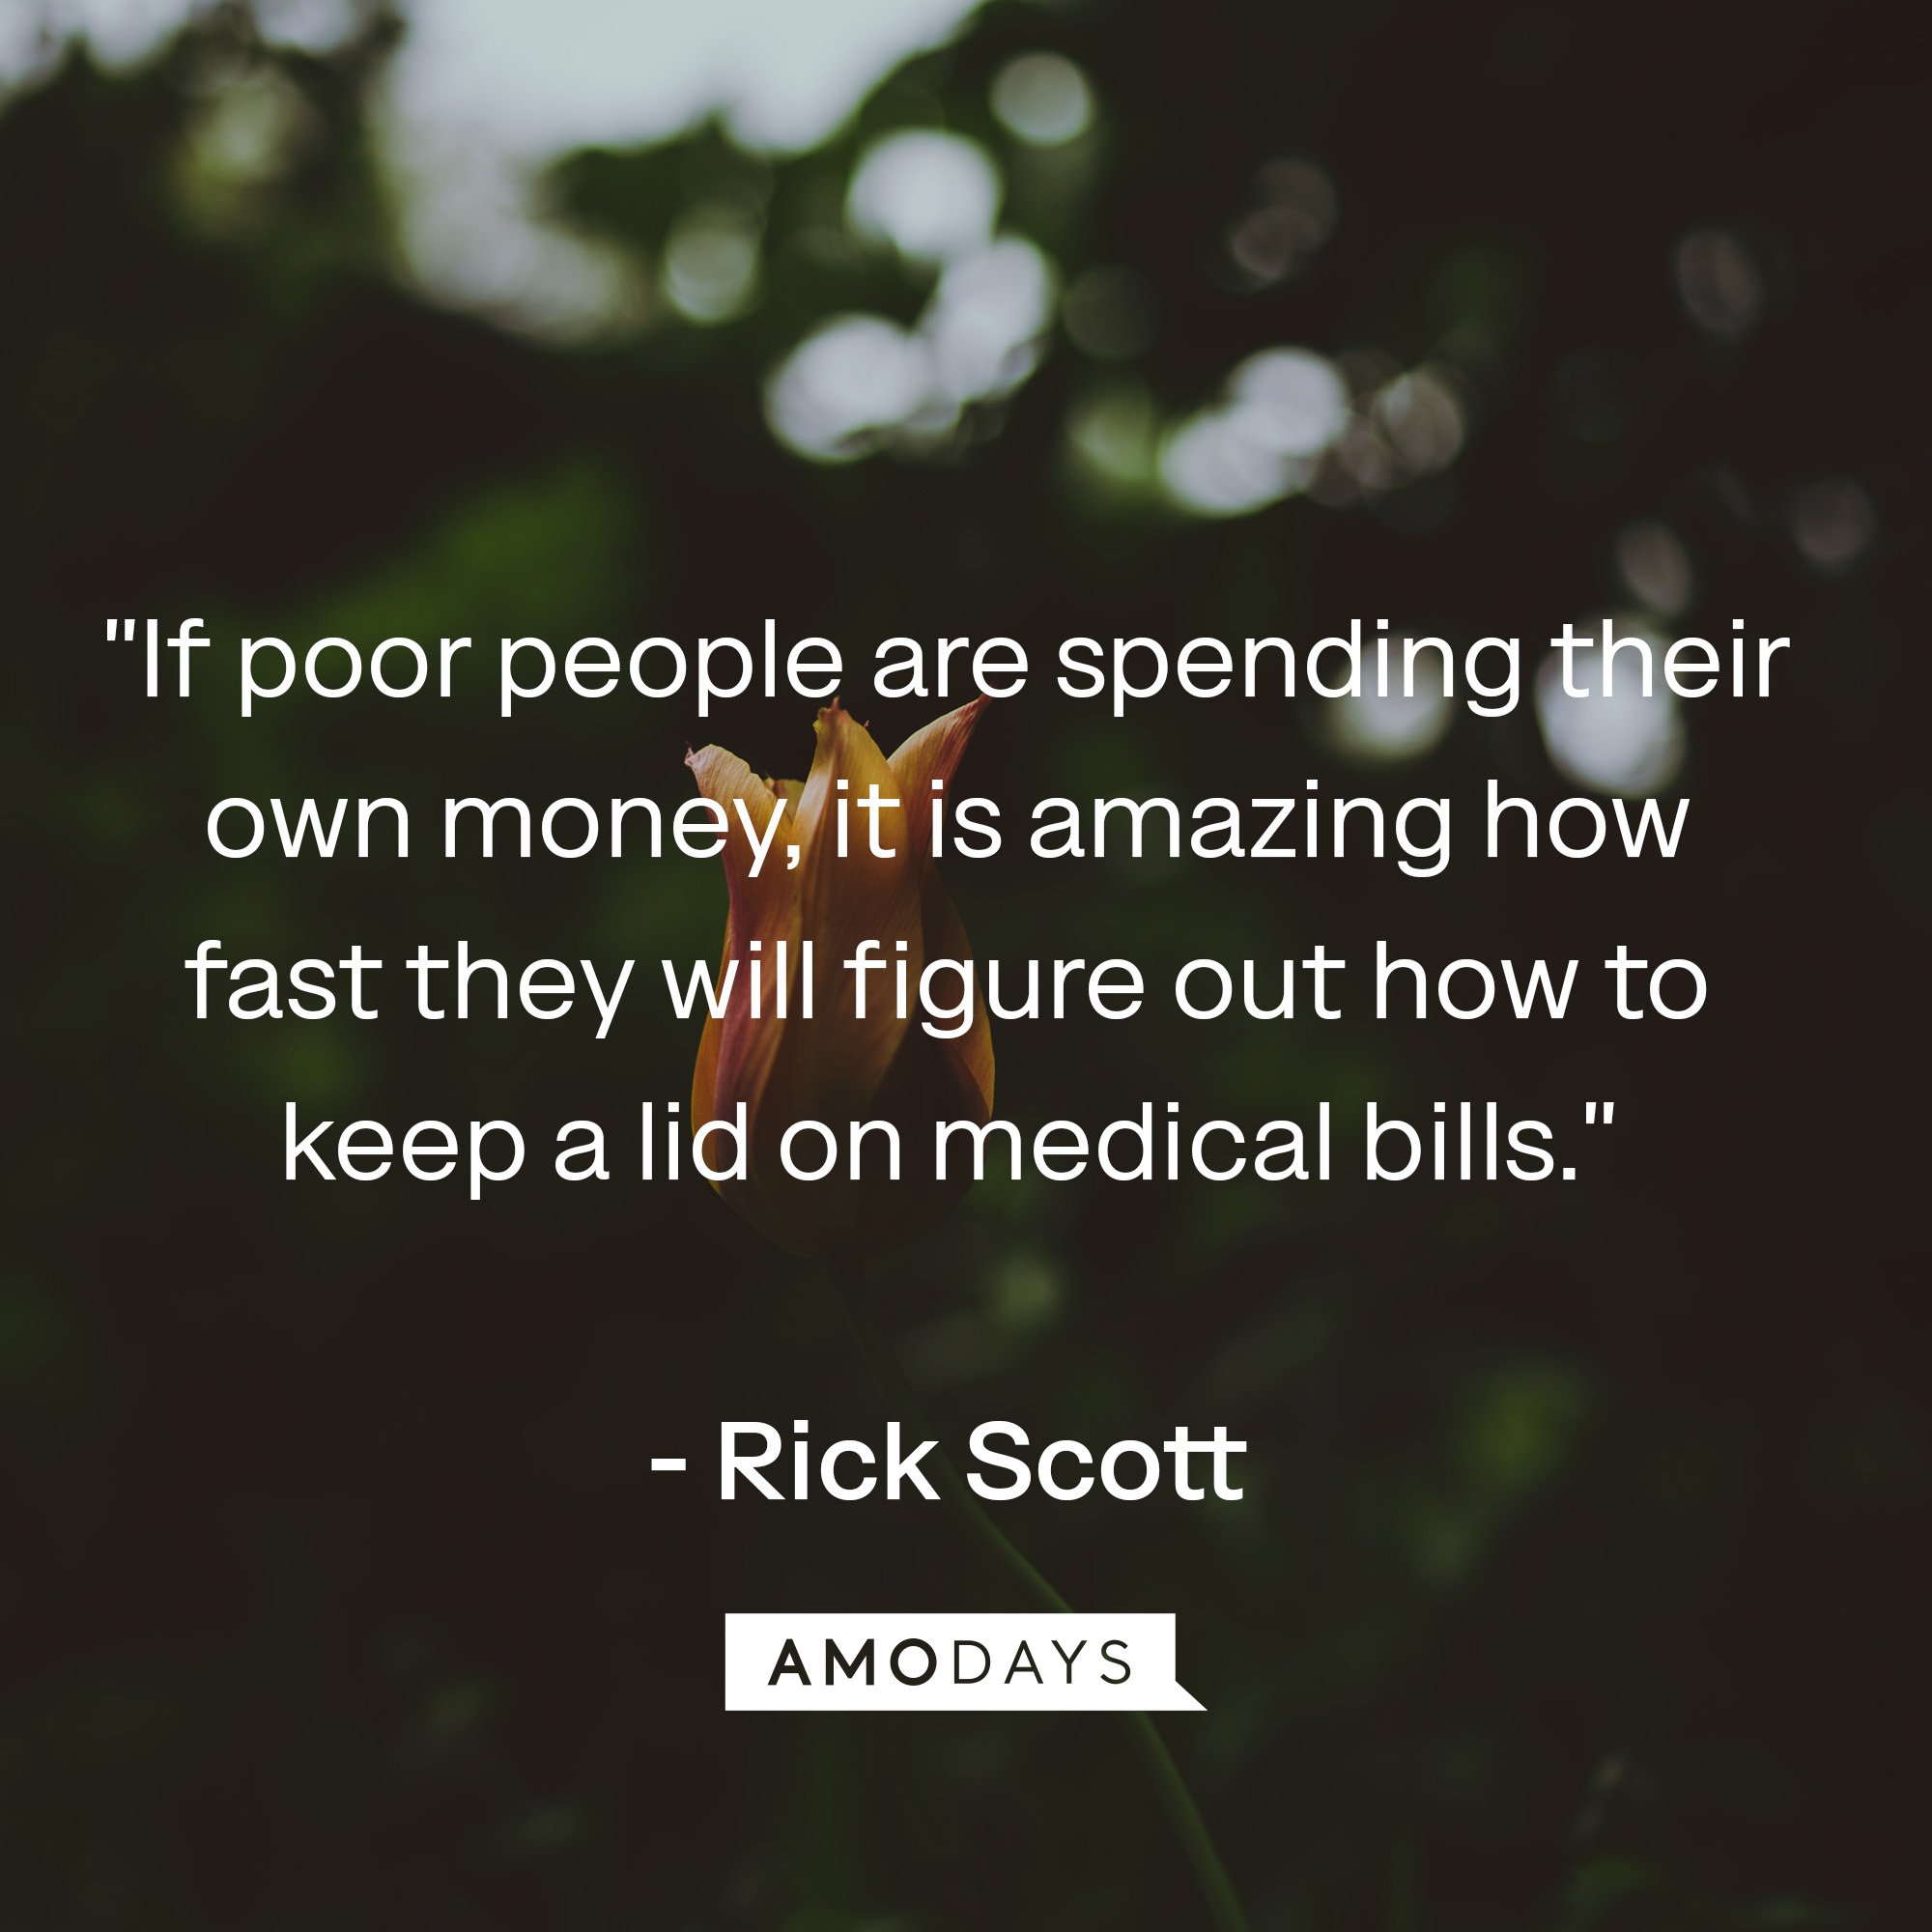 Rick Scott's quote: "If poor people are spending their own money, it is amazing how fast they will figure out how to keep a lid on medical bills."  | Image: AmoDays